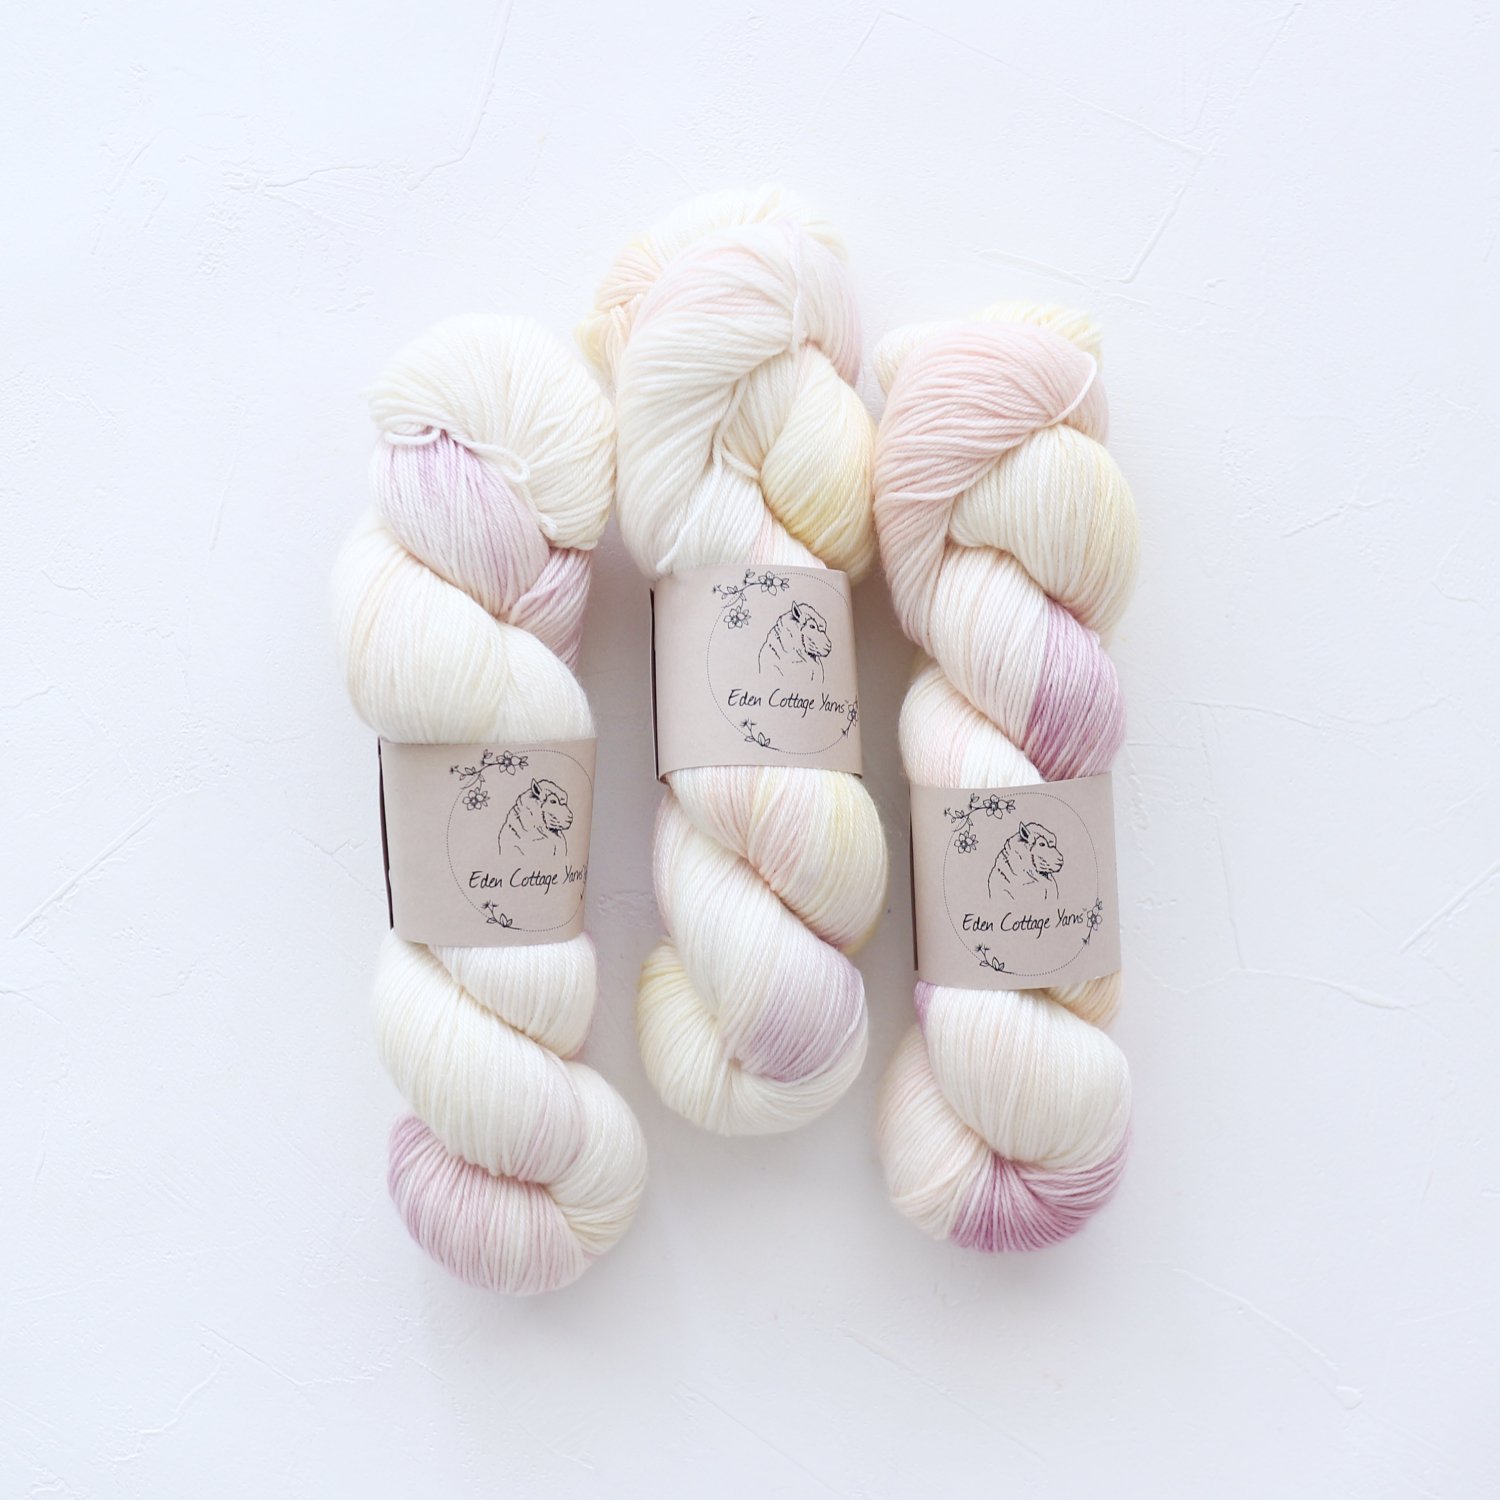 Eden Cottage Yarns<br>Pendle 4ply<br>Spring Bulbs